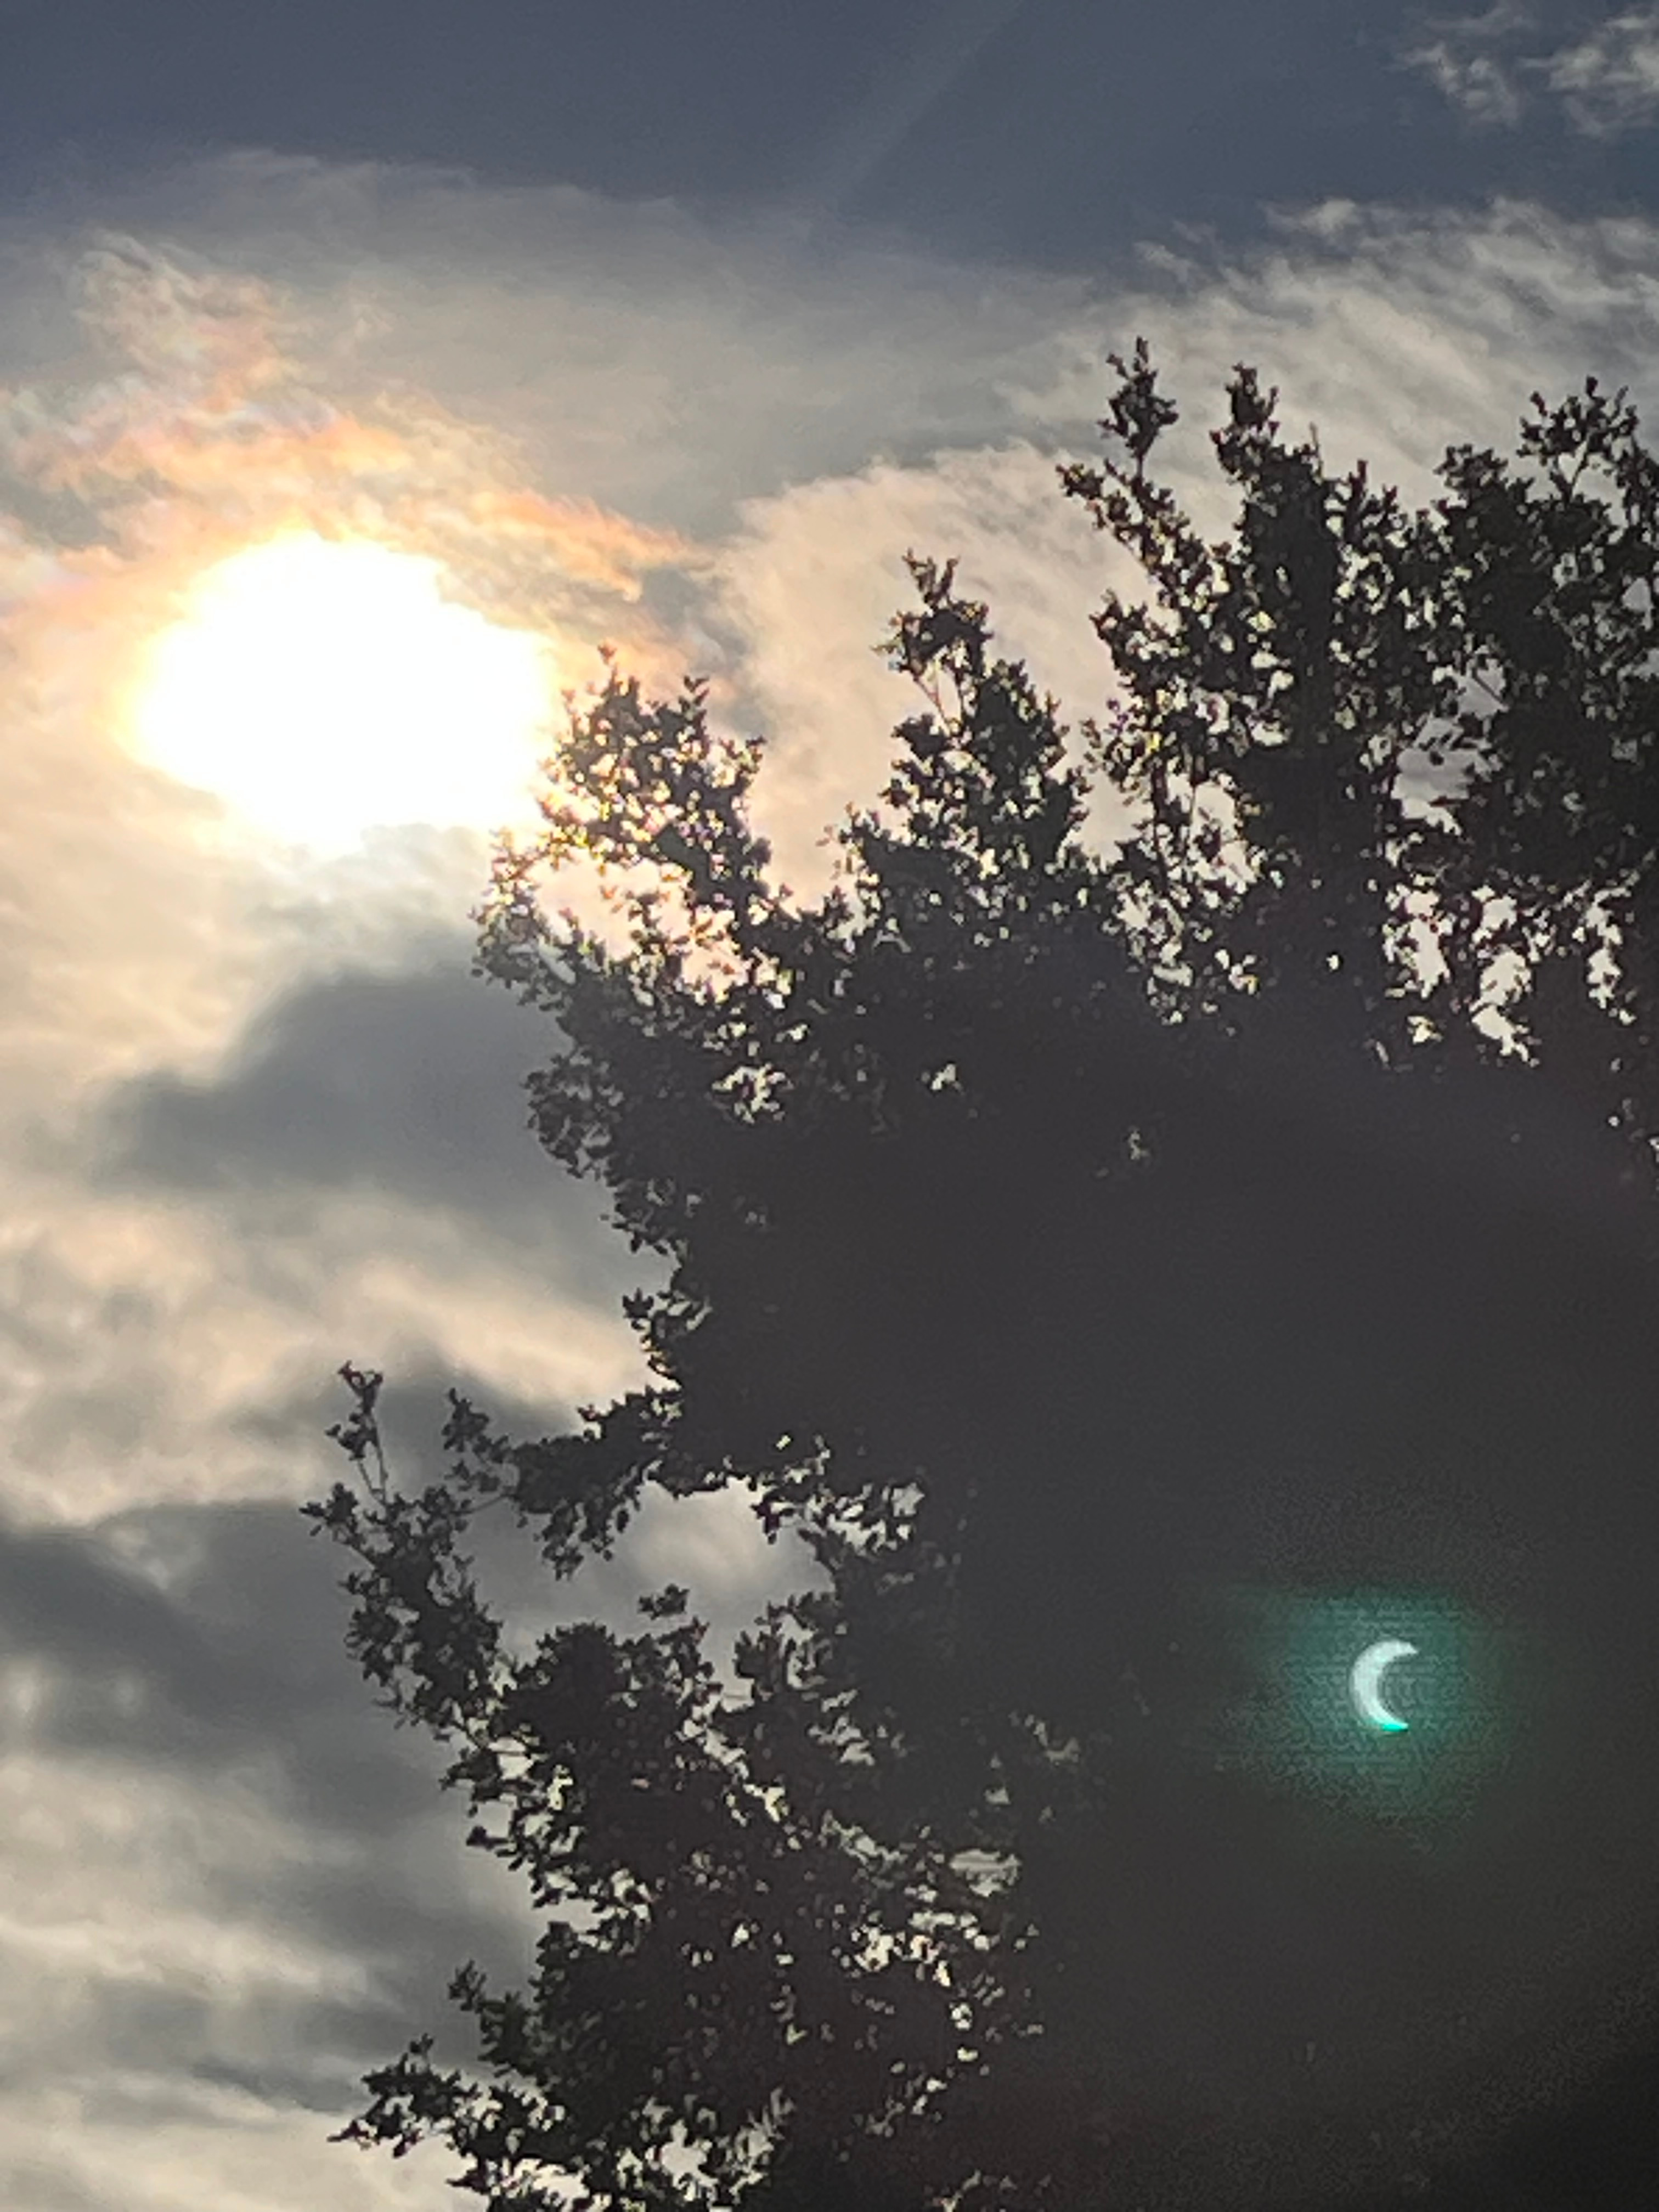 the eclipse in some clouds. the clouds appear dark grey in the shade but there are less dense spots where they appear a light gold color. in the bottom right there is an oak tree, it looks completely black cuz its the shaded side. and a greenish artefact showing an imprint of the eclipse is over the tree